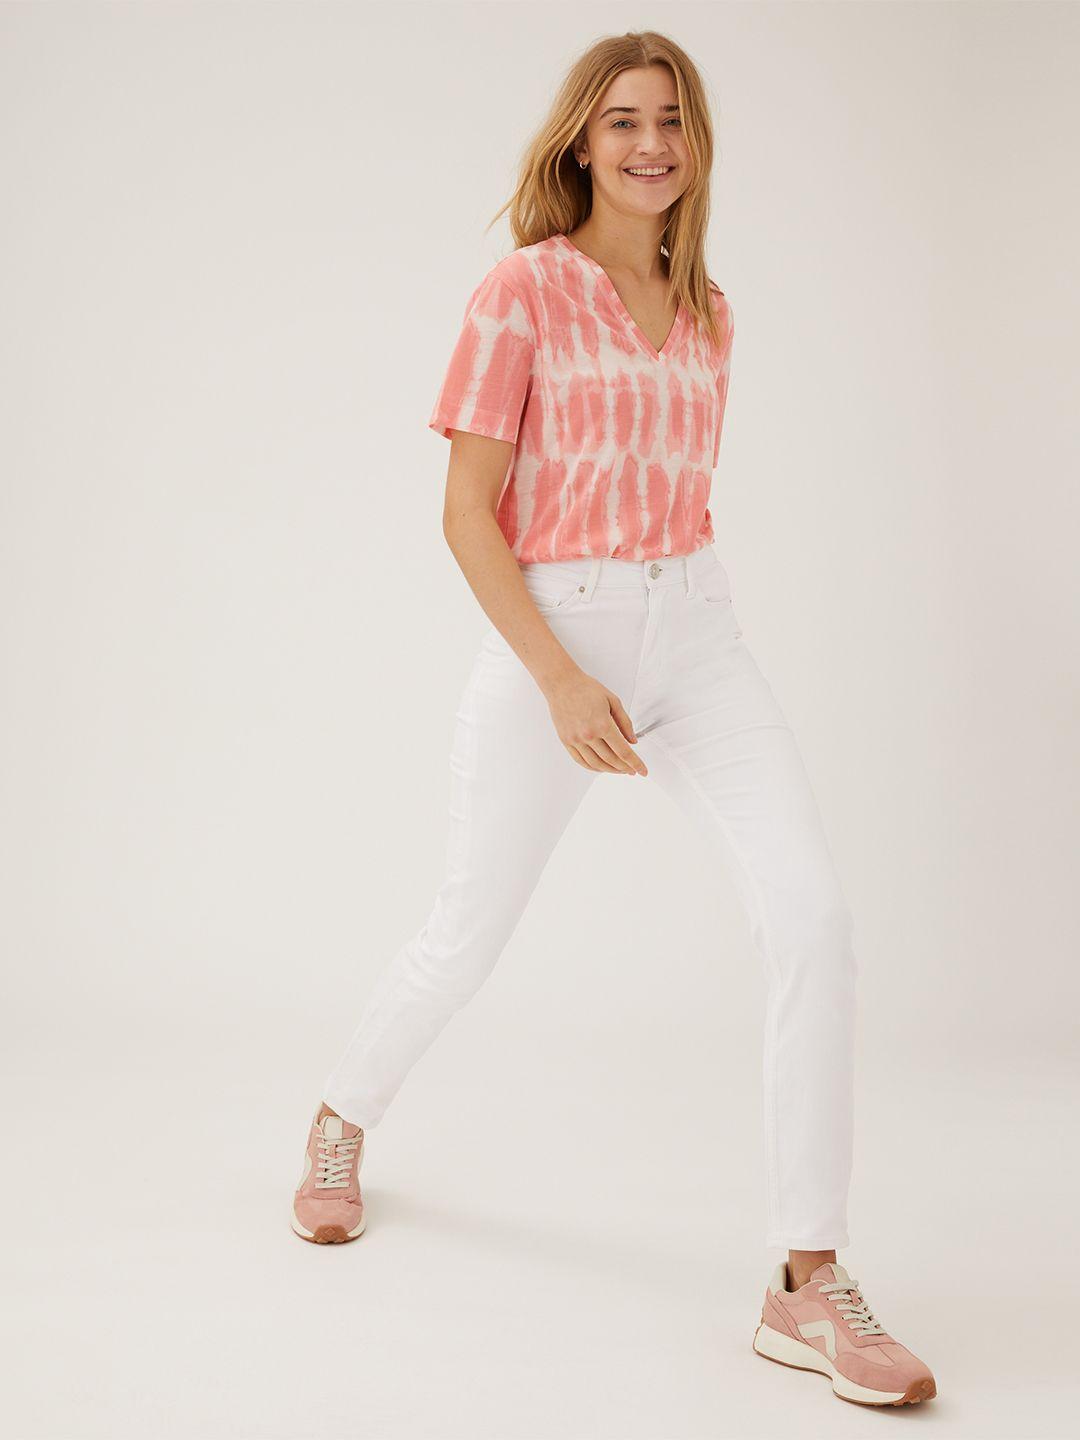 marks-&-spencer-pink-tie-and-dye-print-top